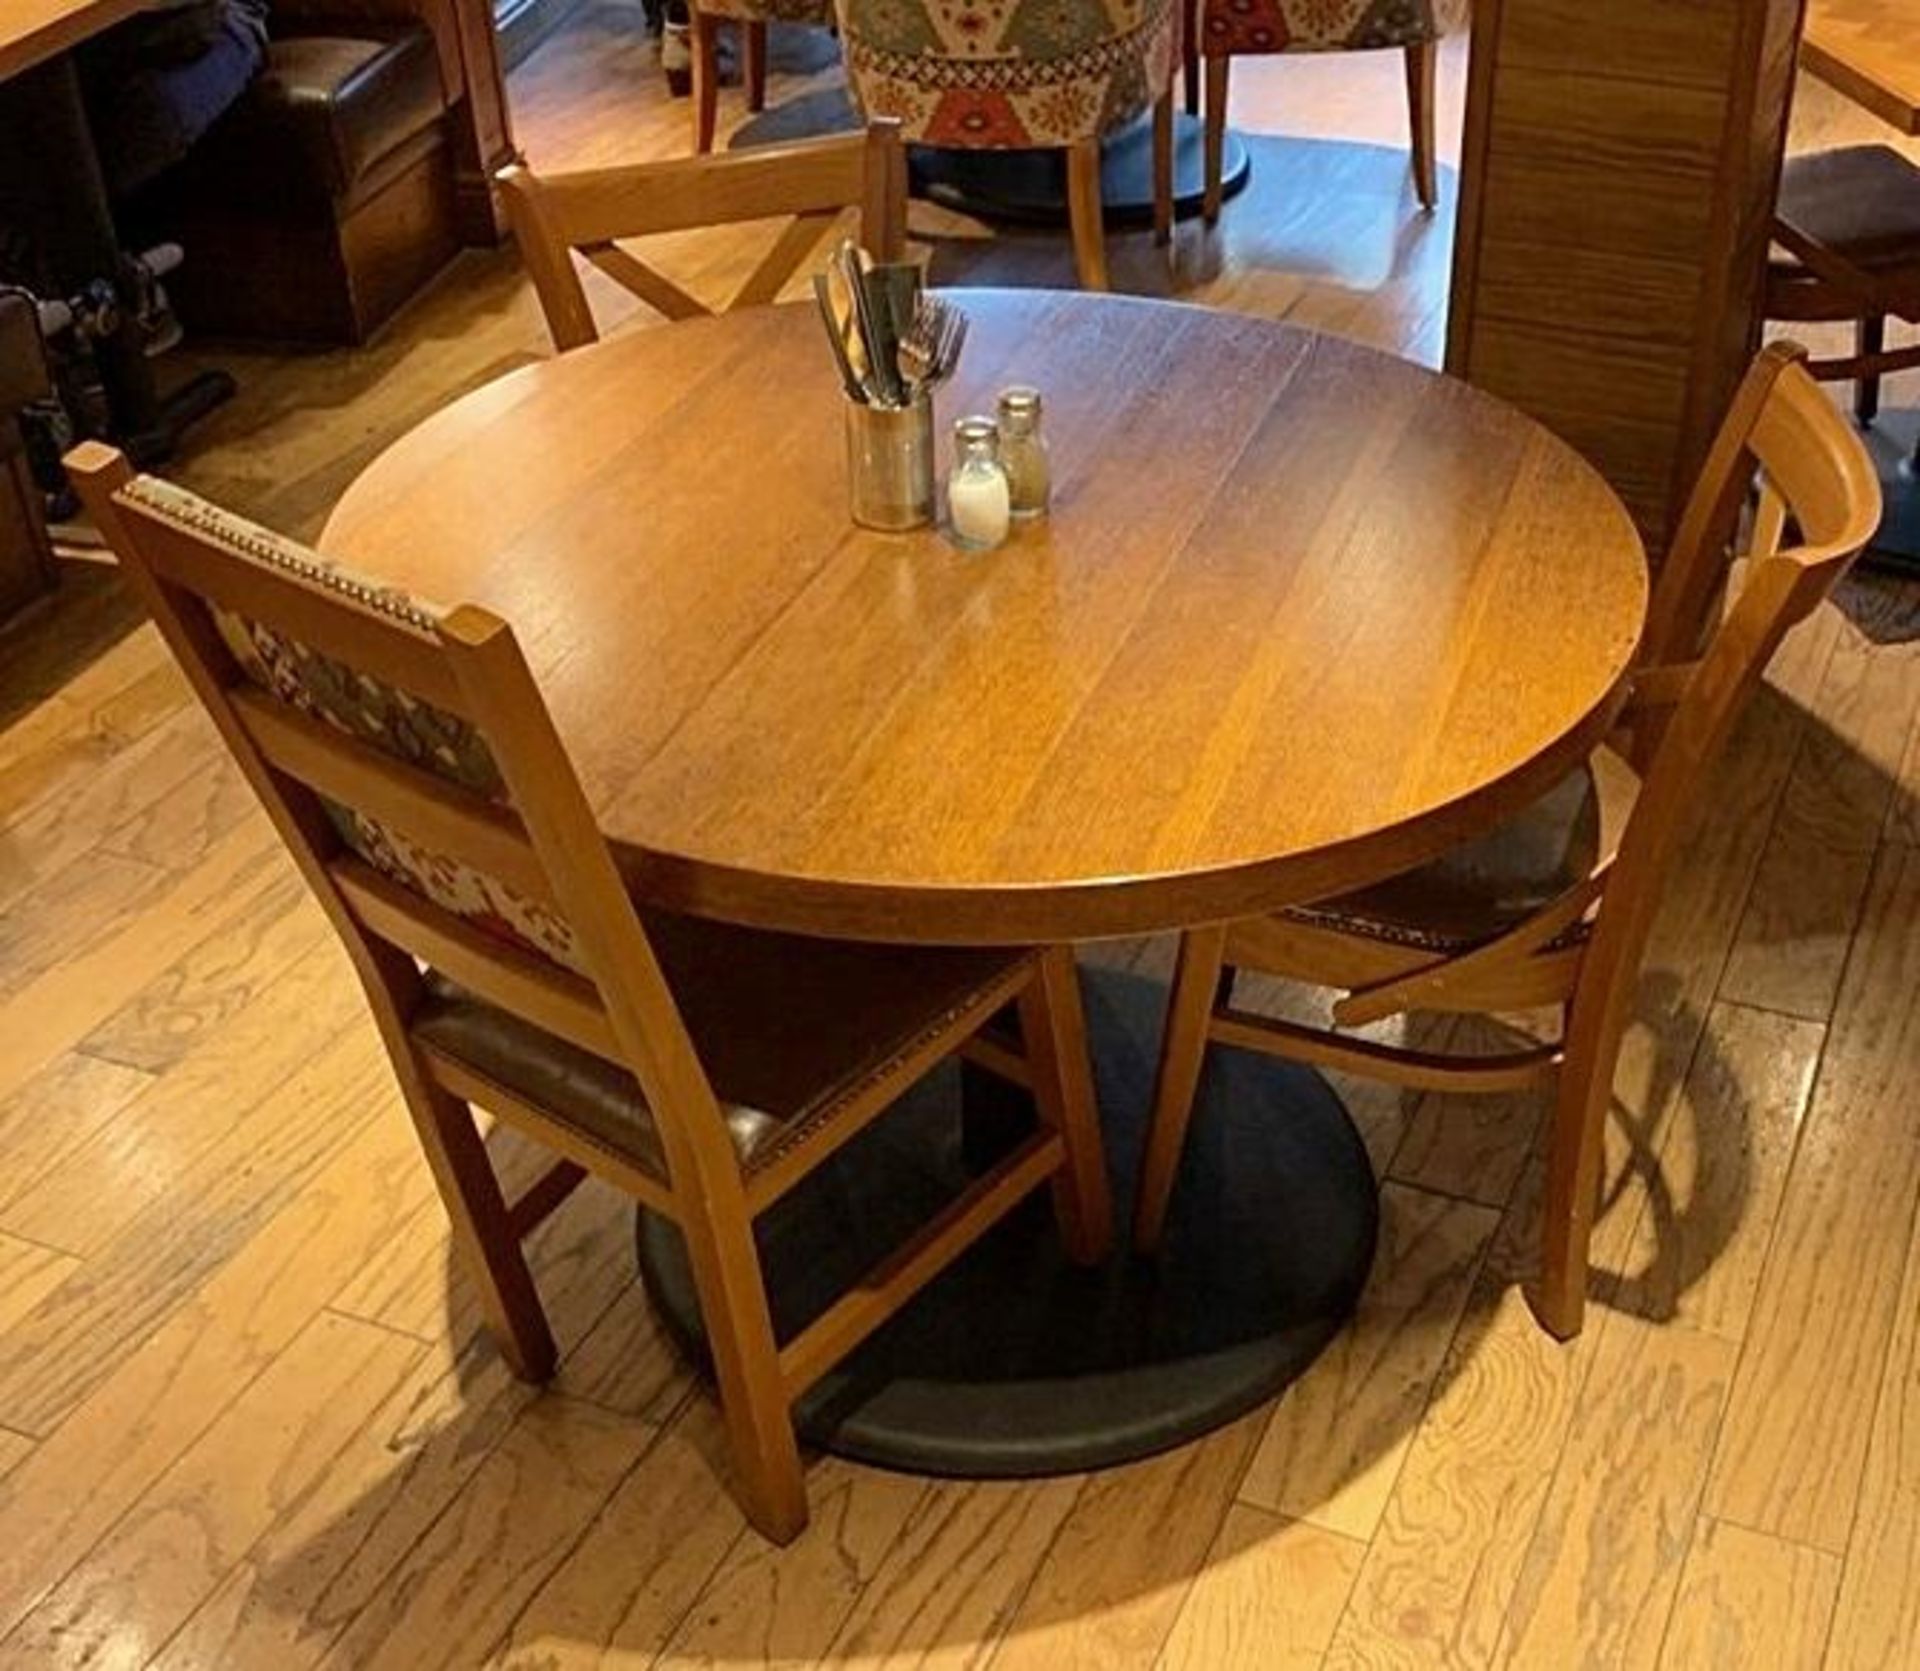 1 x Large Circular Wood And Metal Dining Table - Dimensions: W110cm H77cm - CL339 - From a Popular M - Image 3 of 3